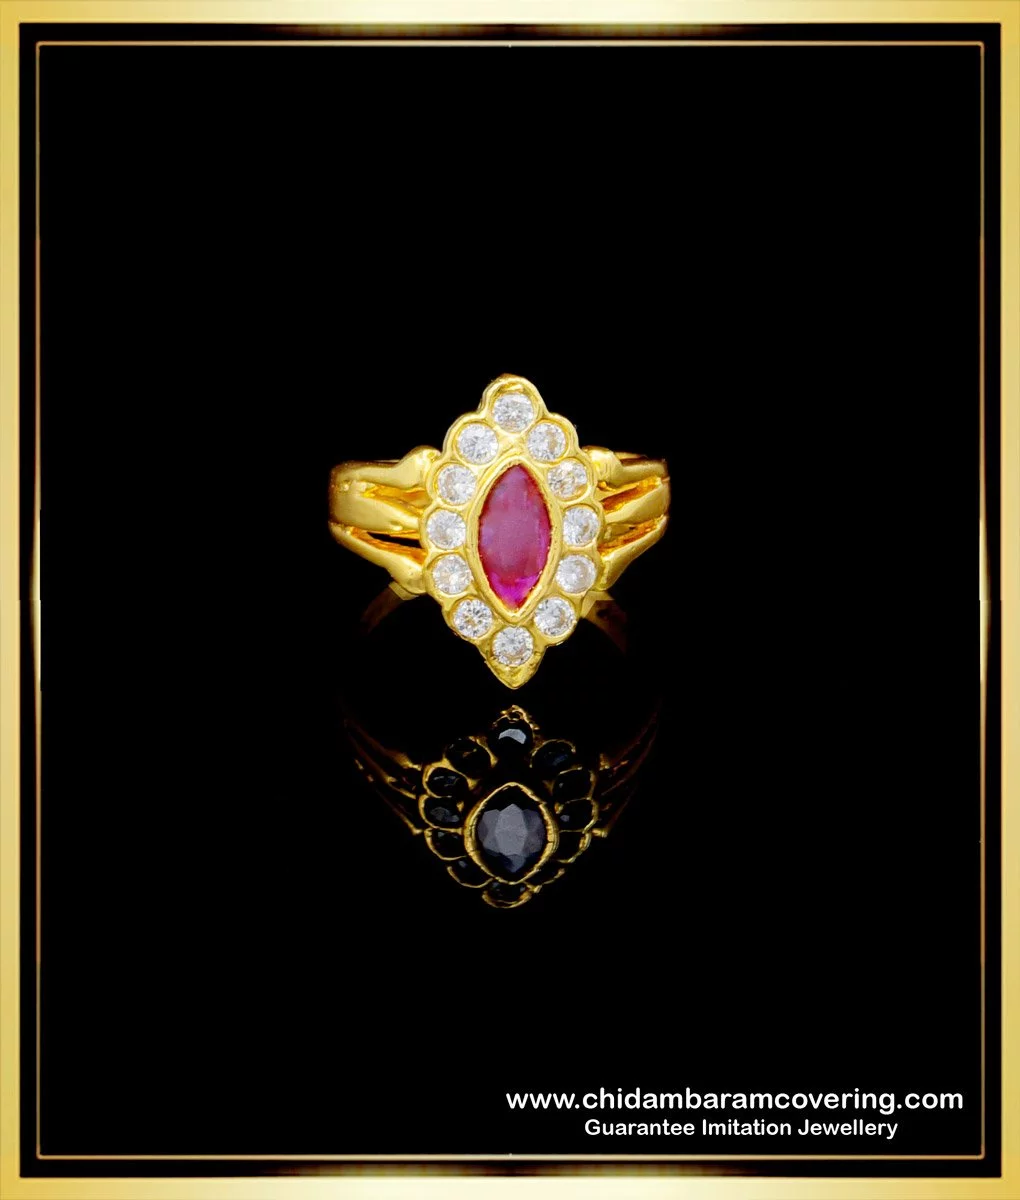 Buy NAGASRI IMPON RING online from 270668 IMPON RINGS